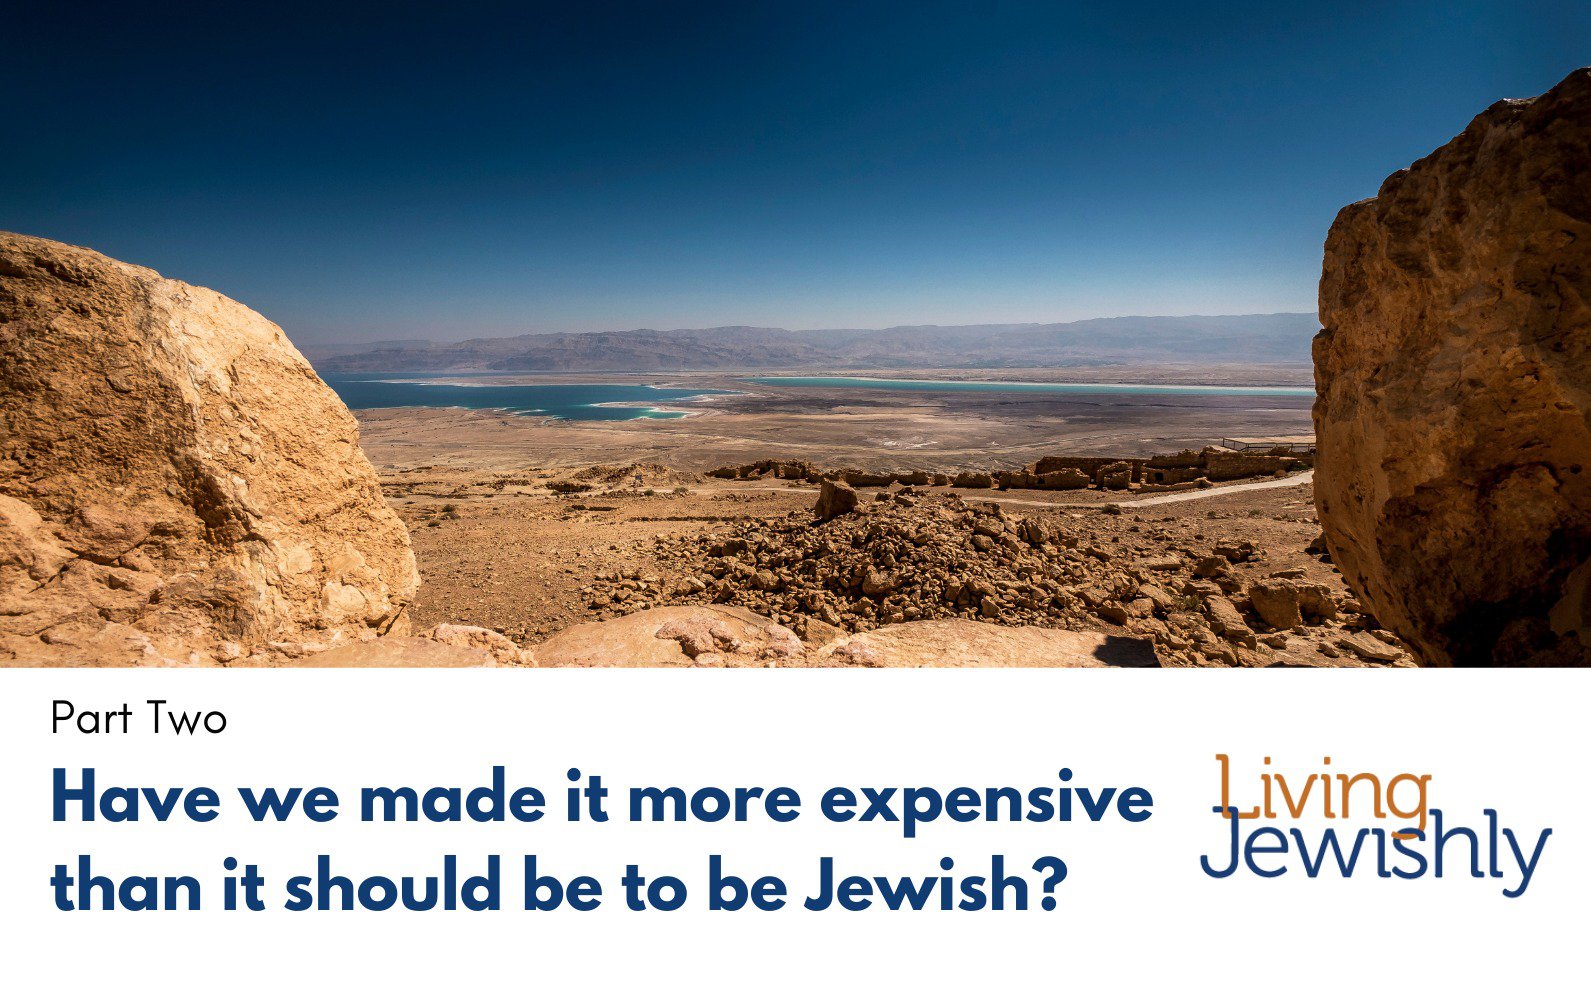 Have we made it more expensive than it should be to be Jewish? – Part Two